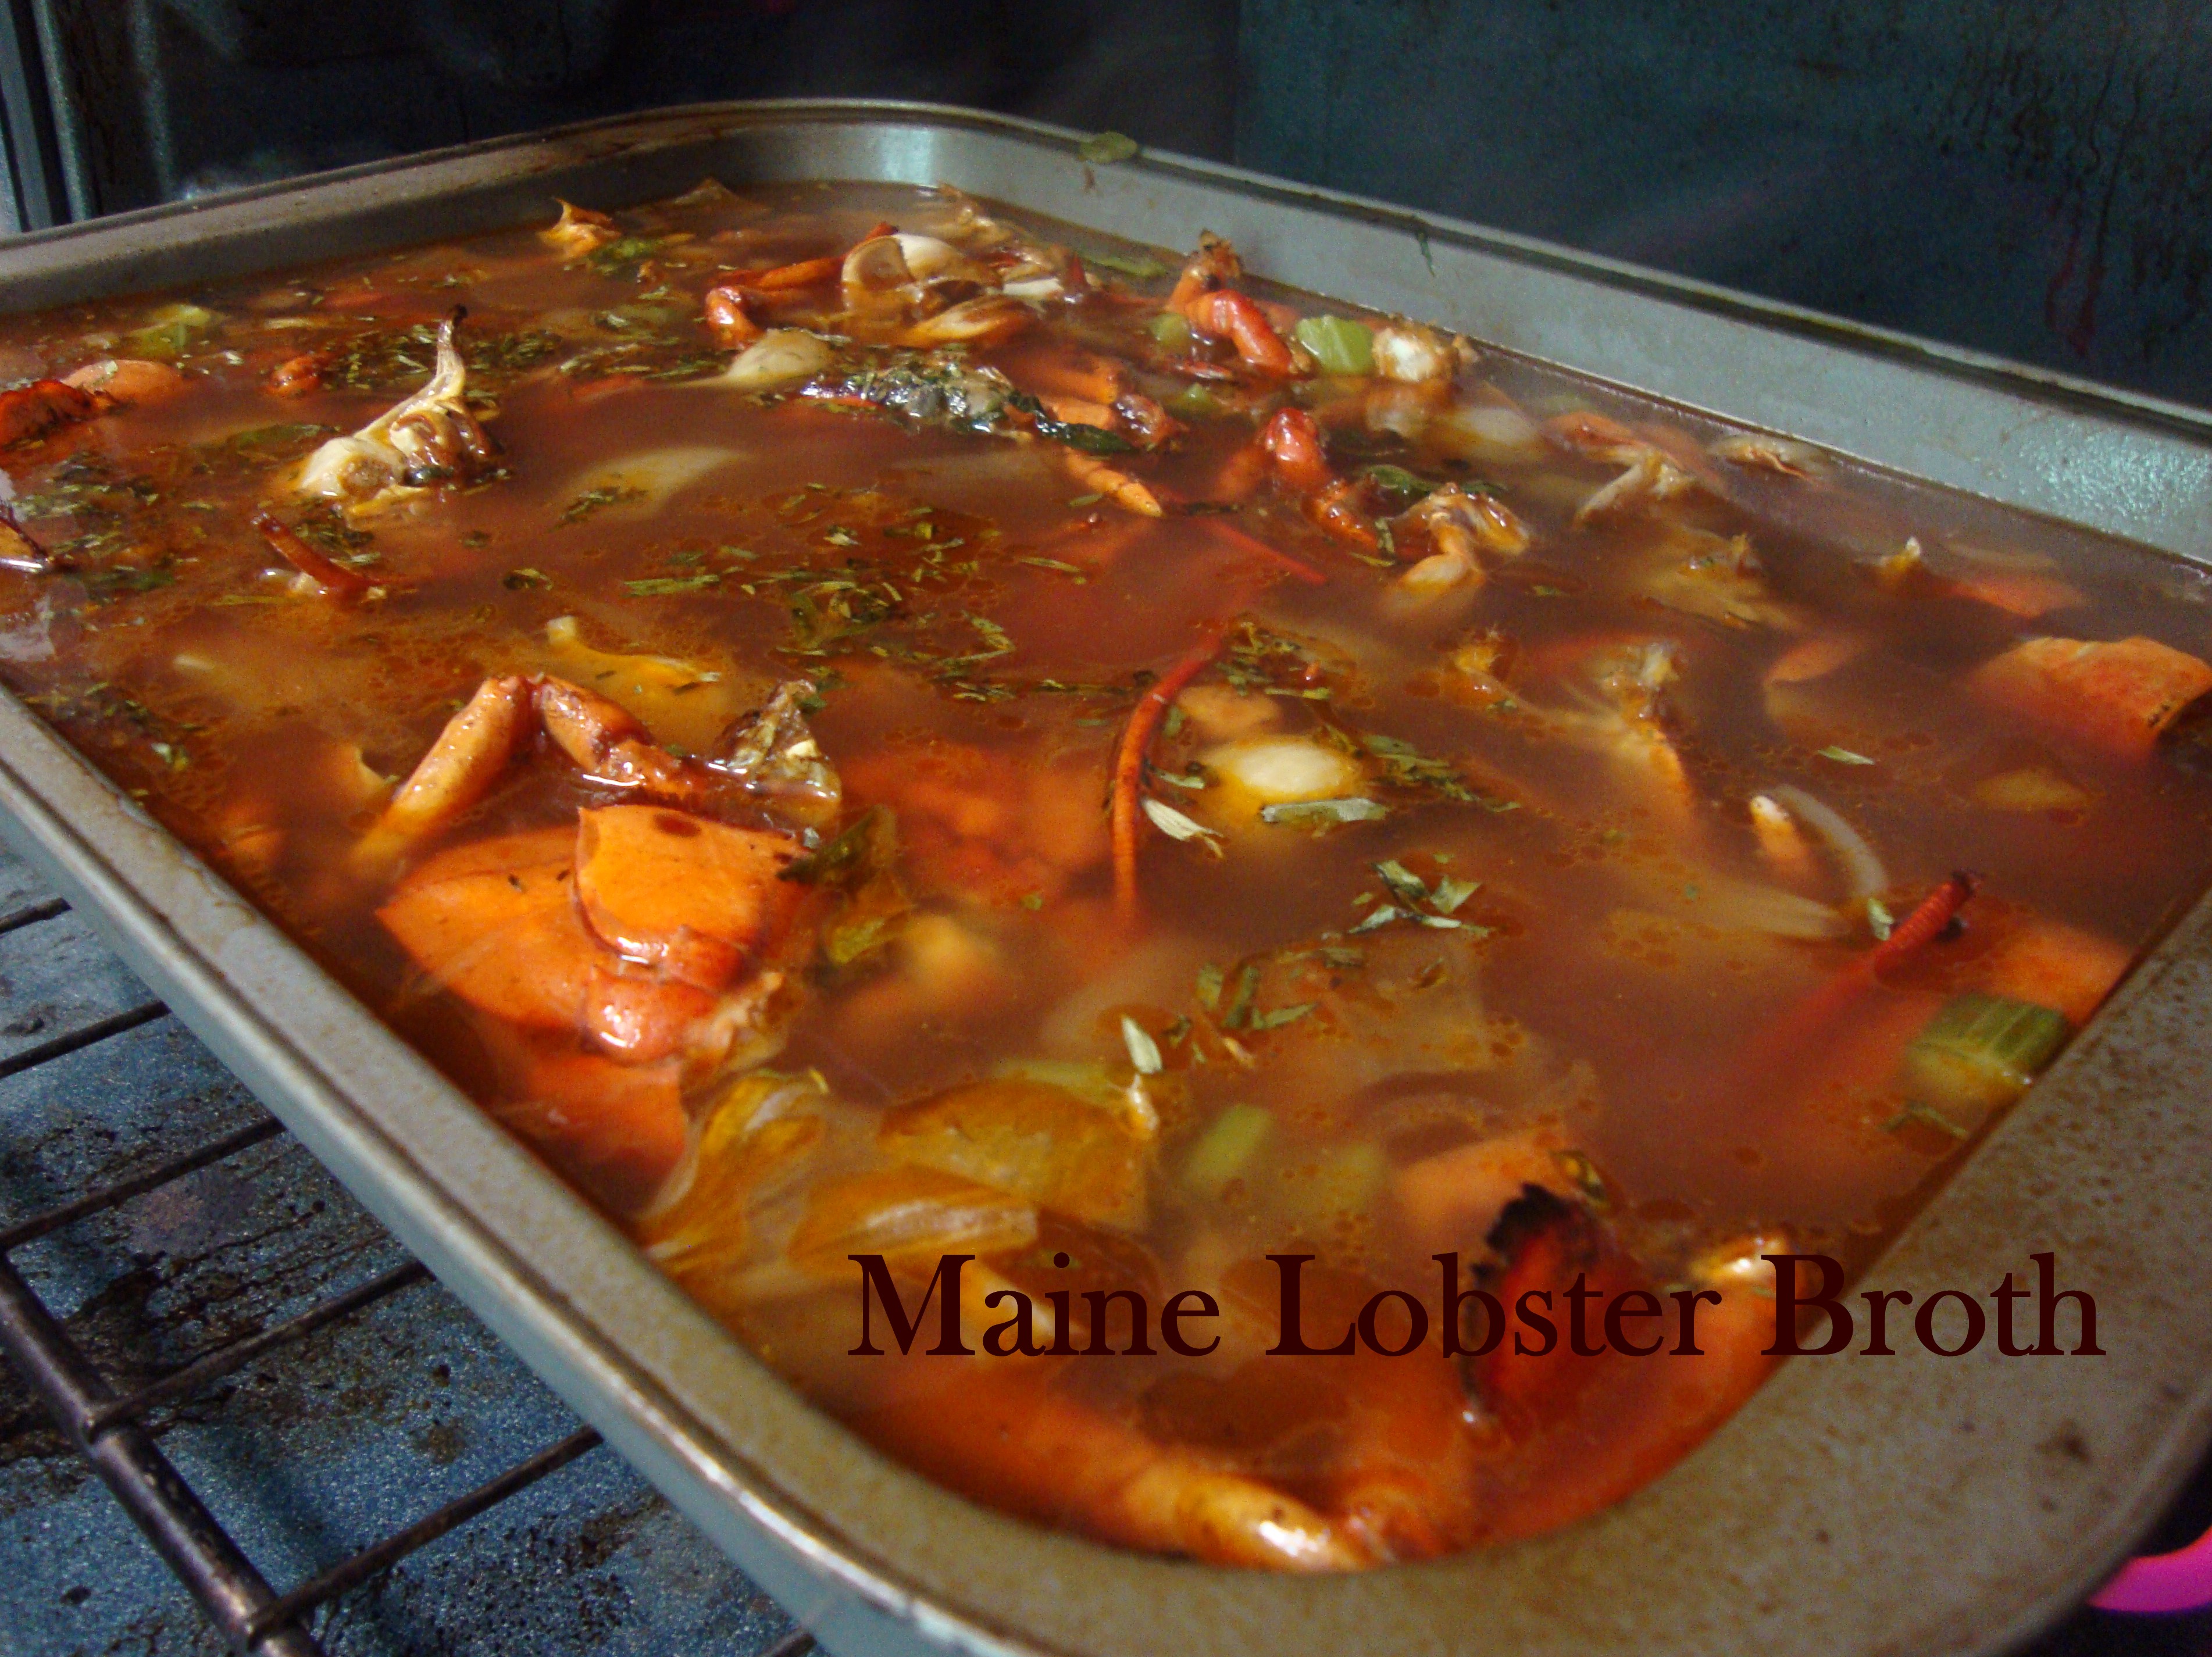 Rich and Flavorful Lobster Stock Recipe